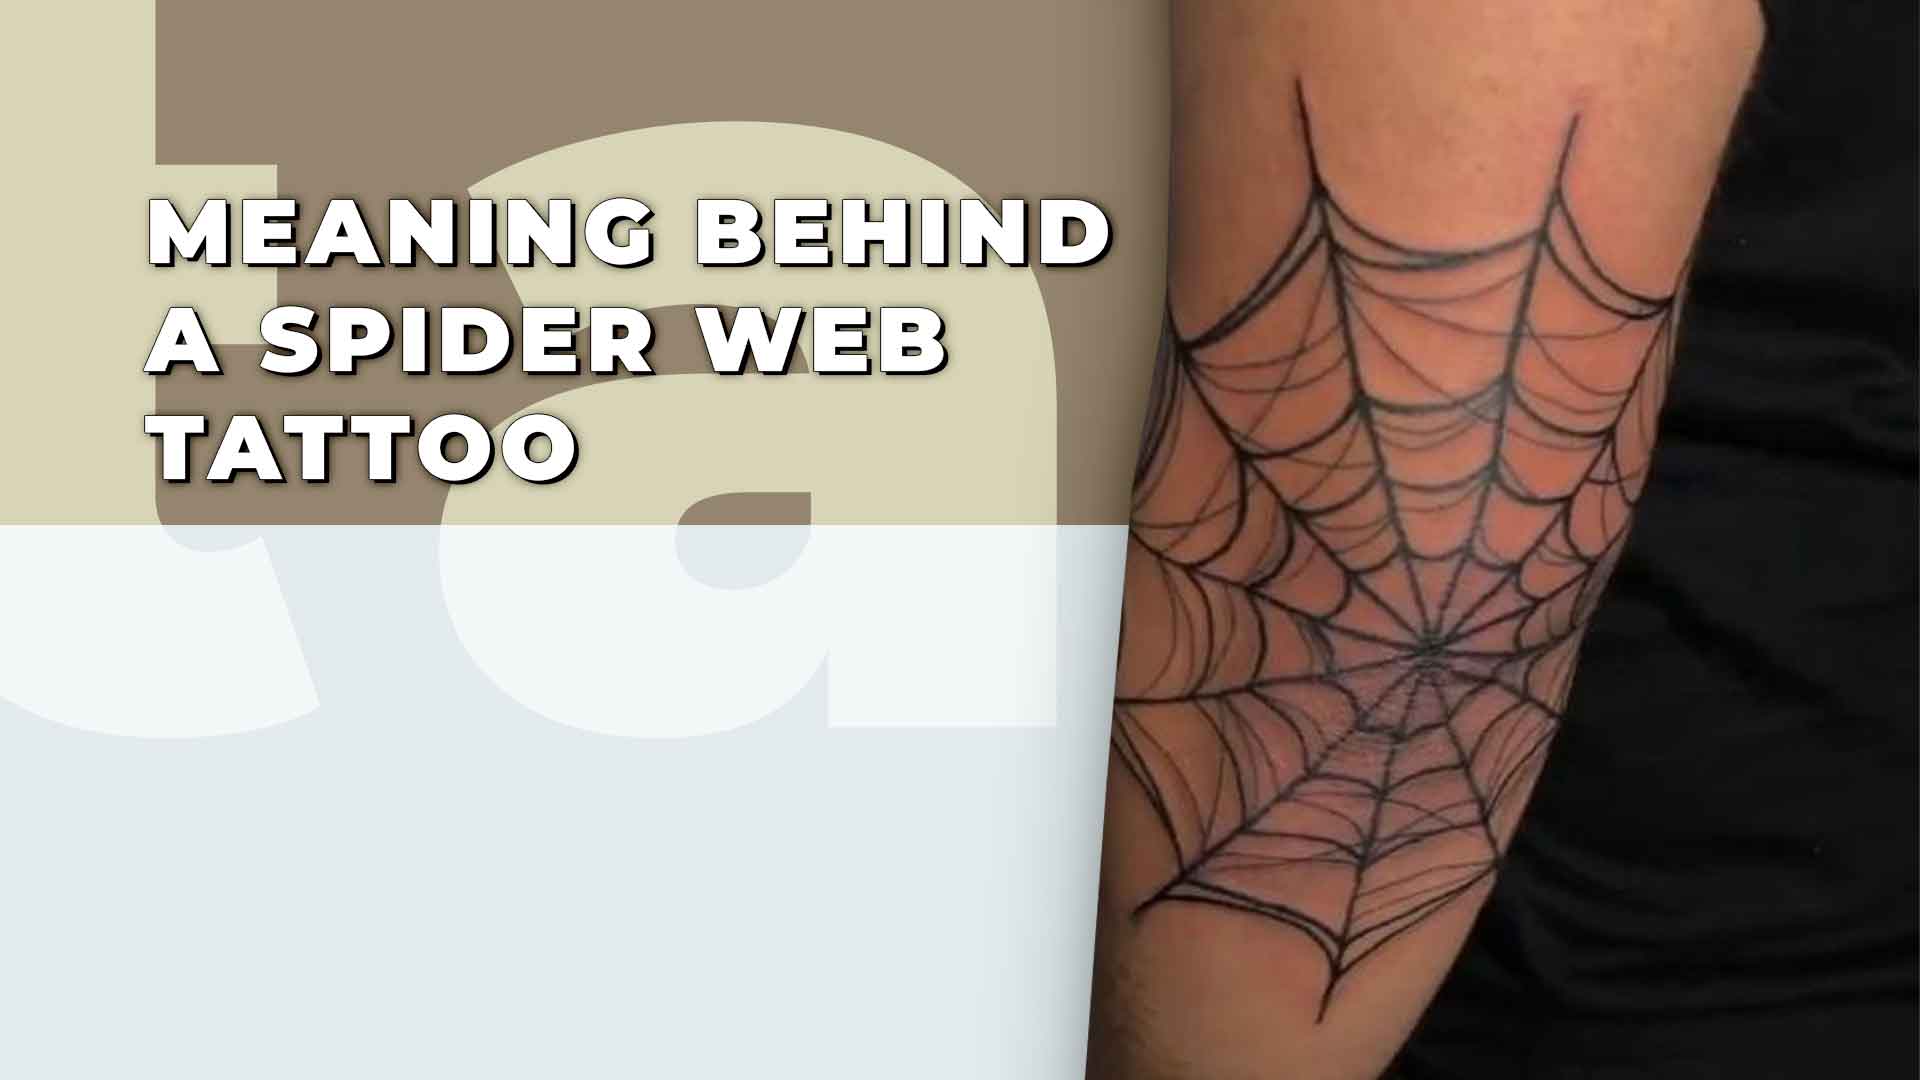 benjamin crutchley recommends spiderweb tattoo on elbow pic